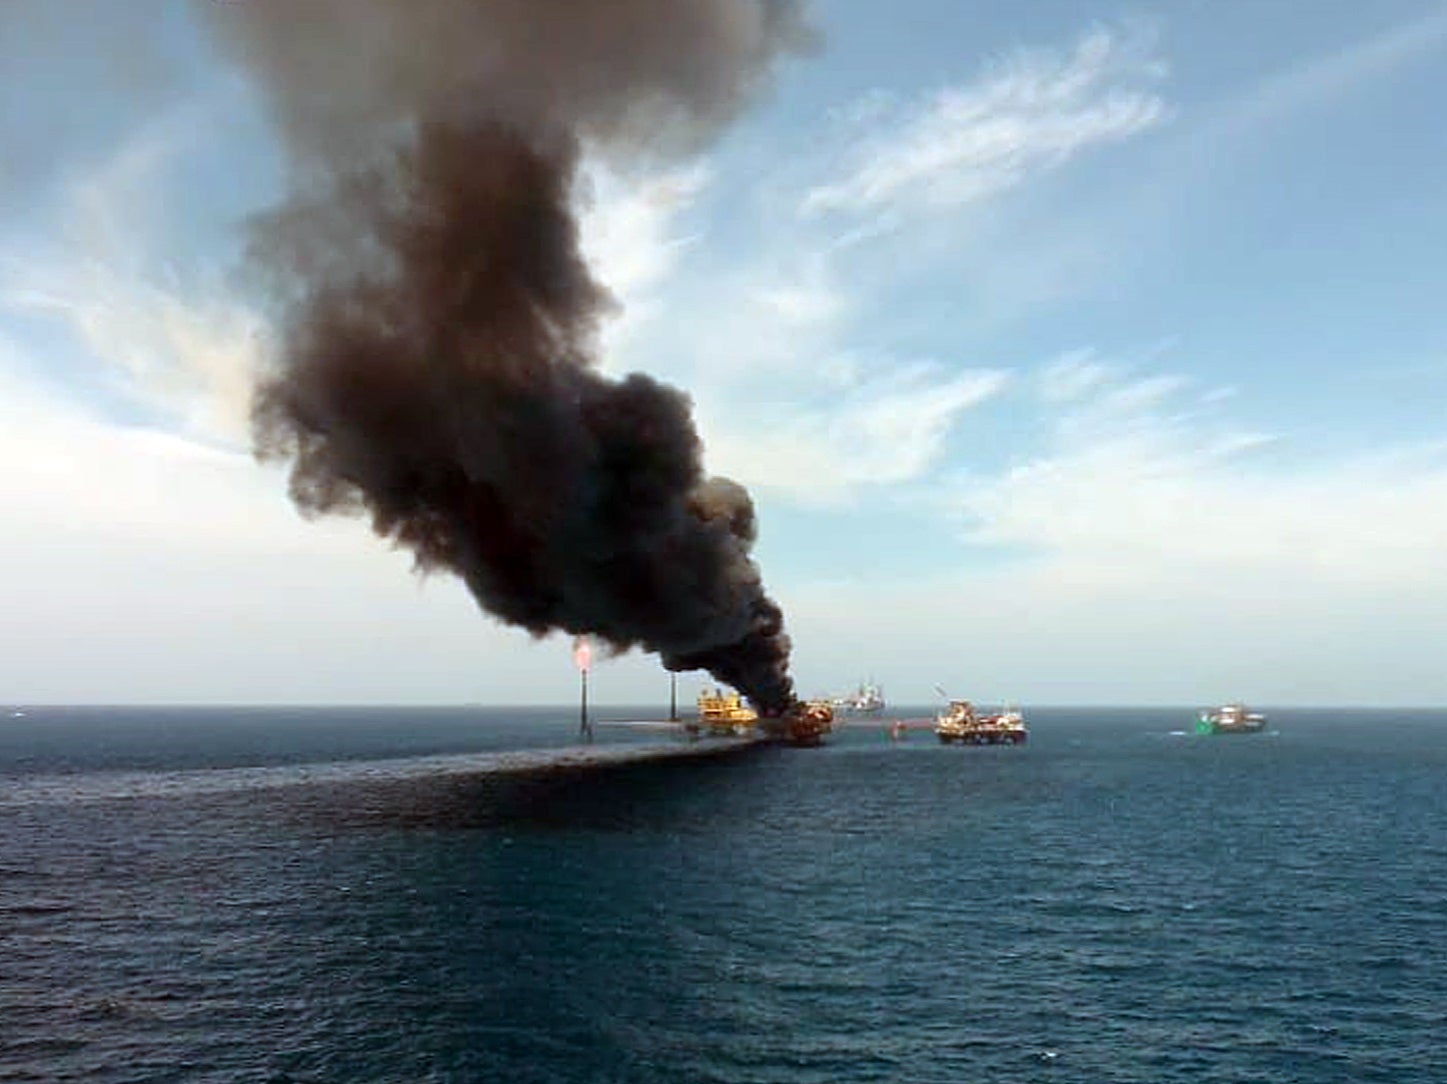 The platform in the Gulf of Mexico erupted into flames during routine maintenance work